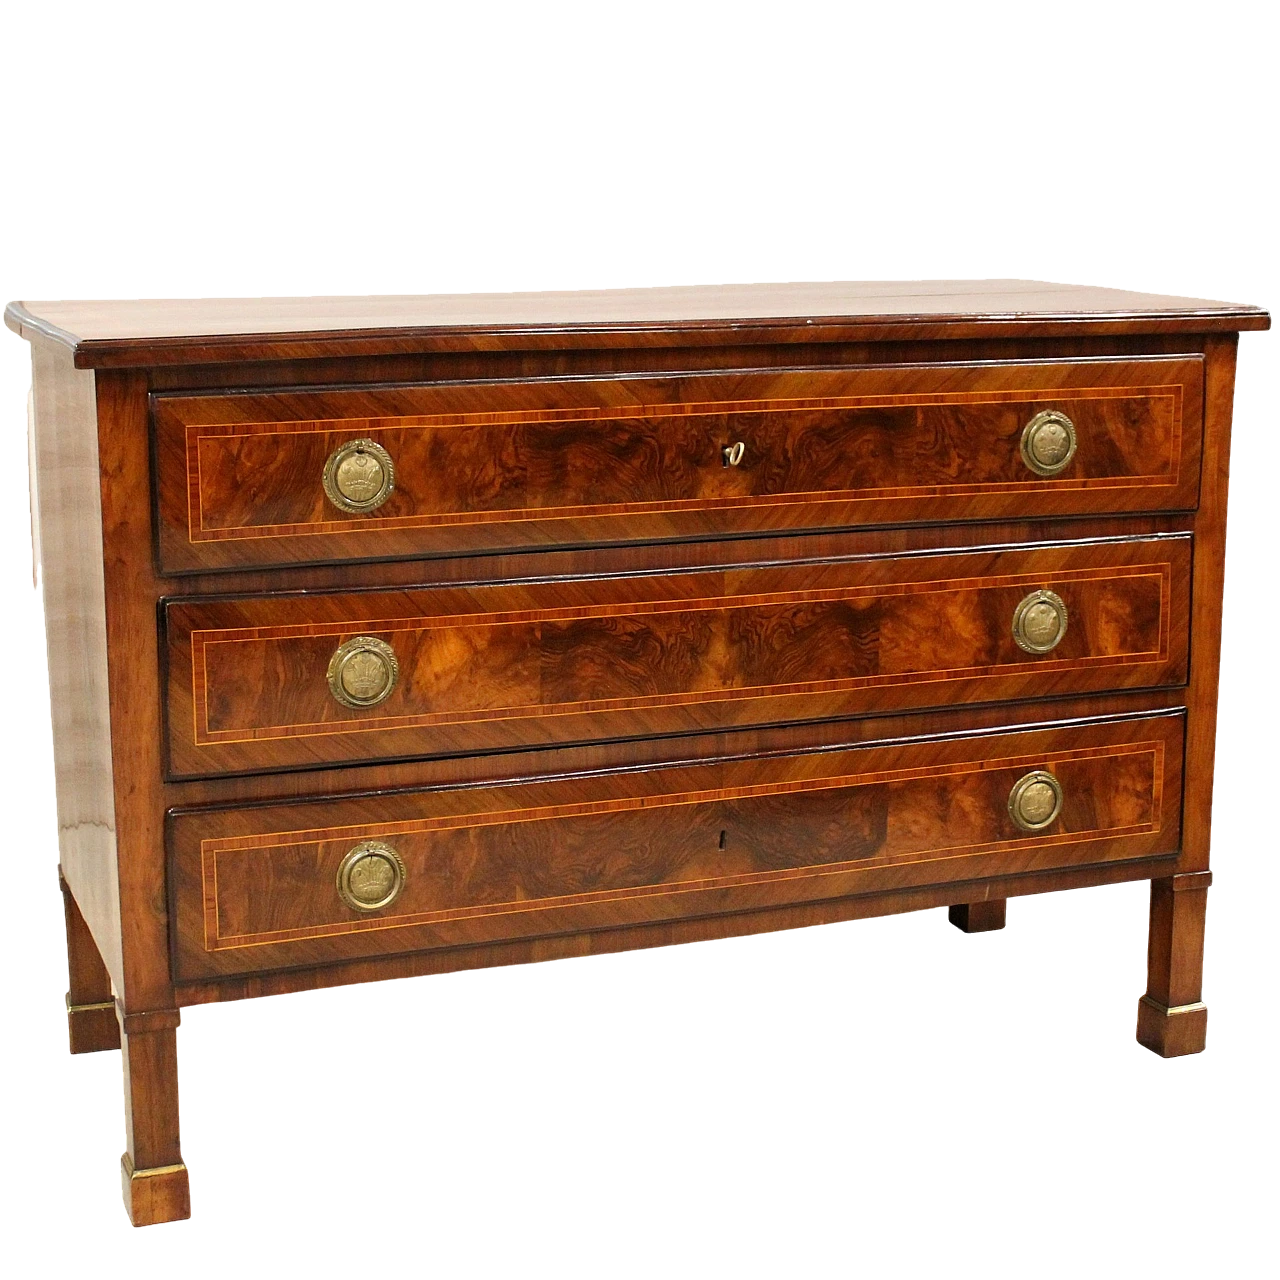 Bolognese Empire solid walnut commode, early 19th century 2